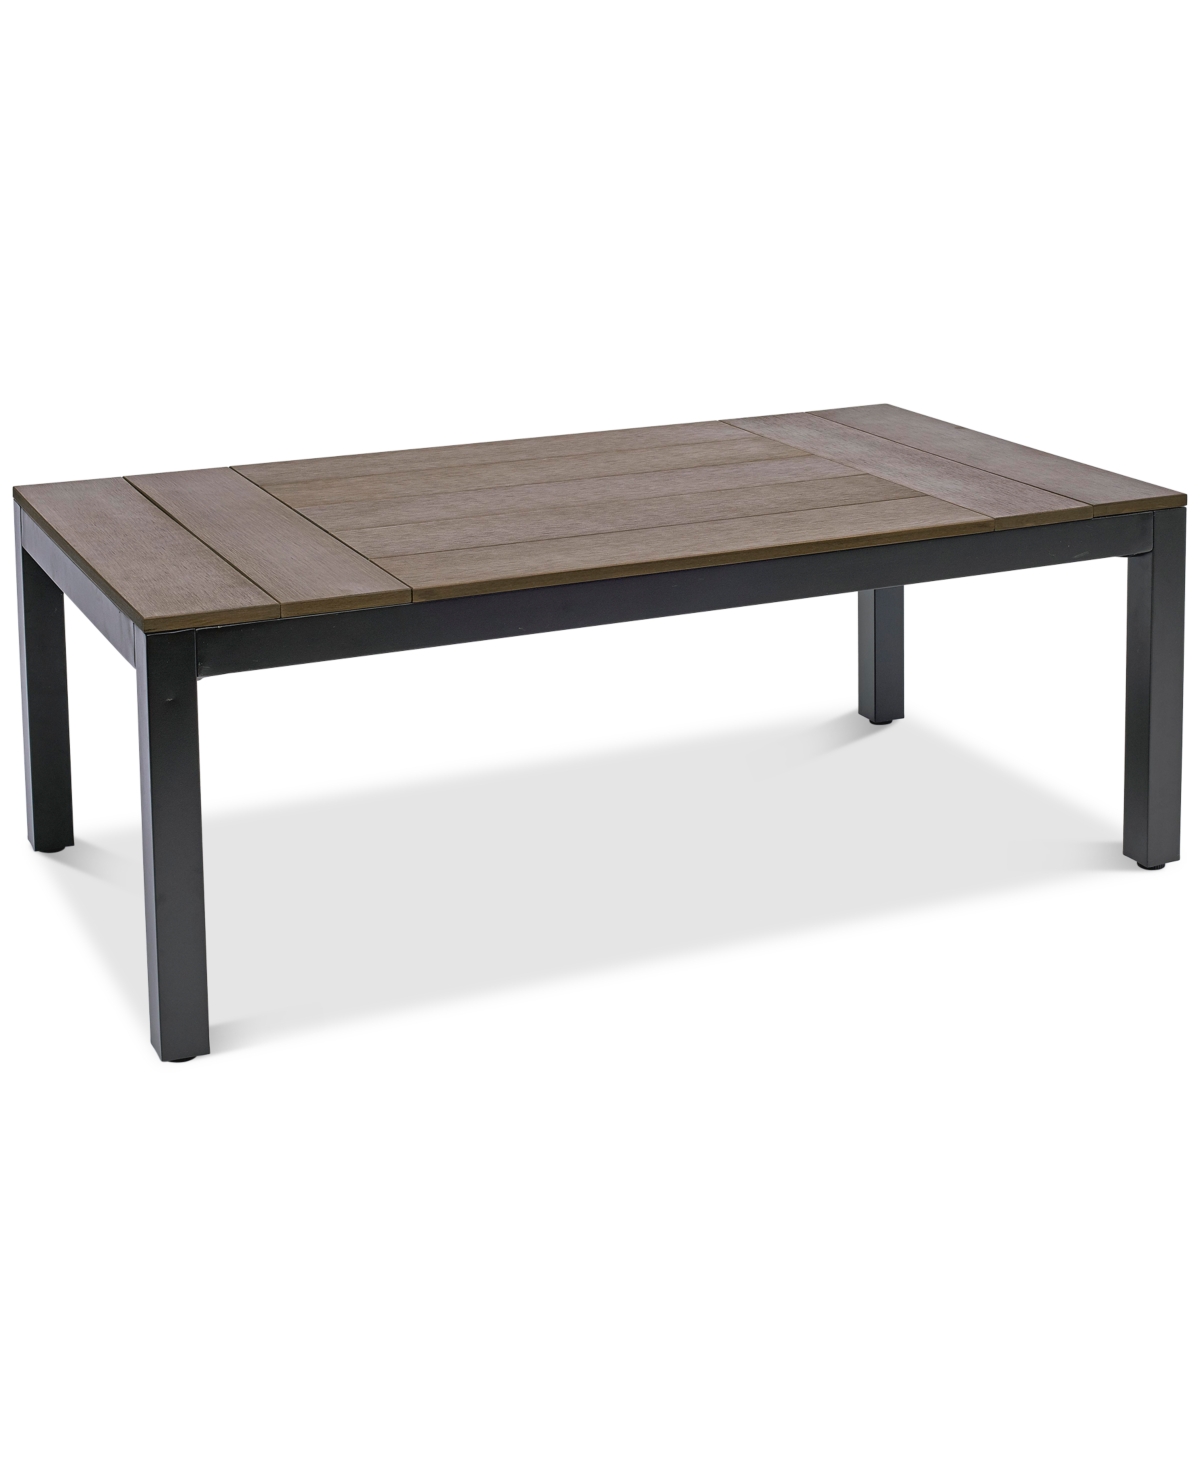 Stockholm Outdoor Coffee Table, Created for Macys